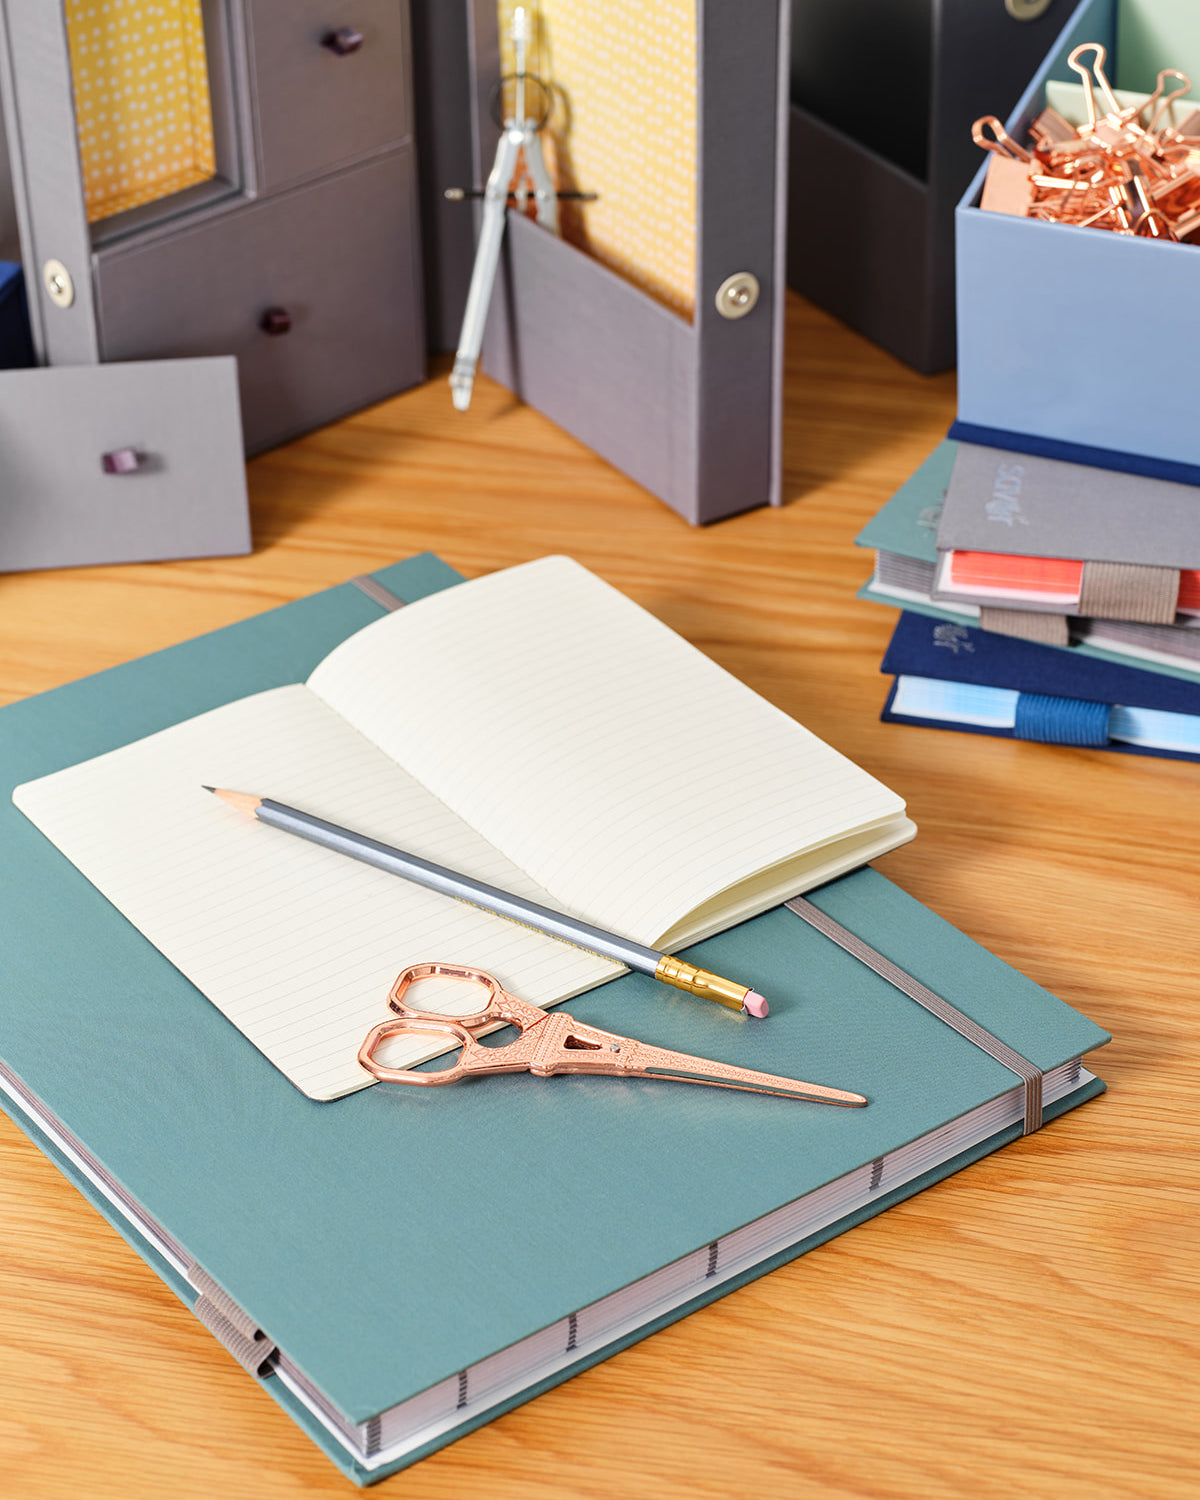 Organization boxes and document organizer folios on a table.